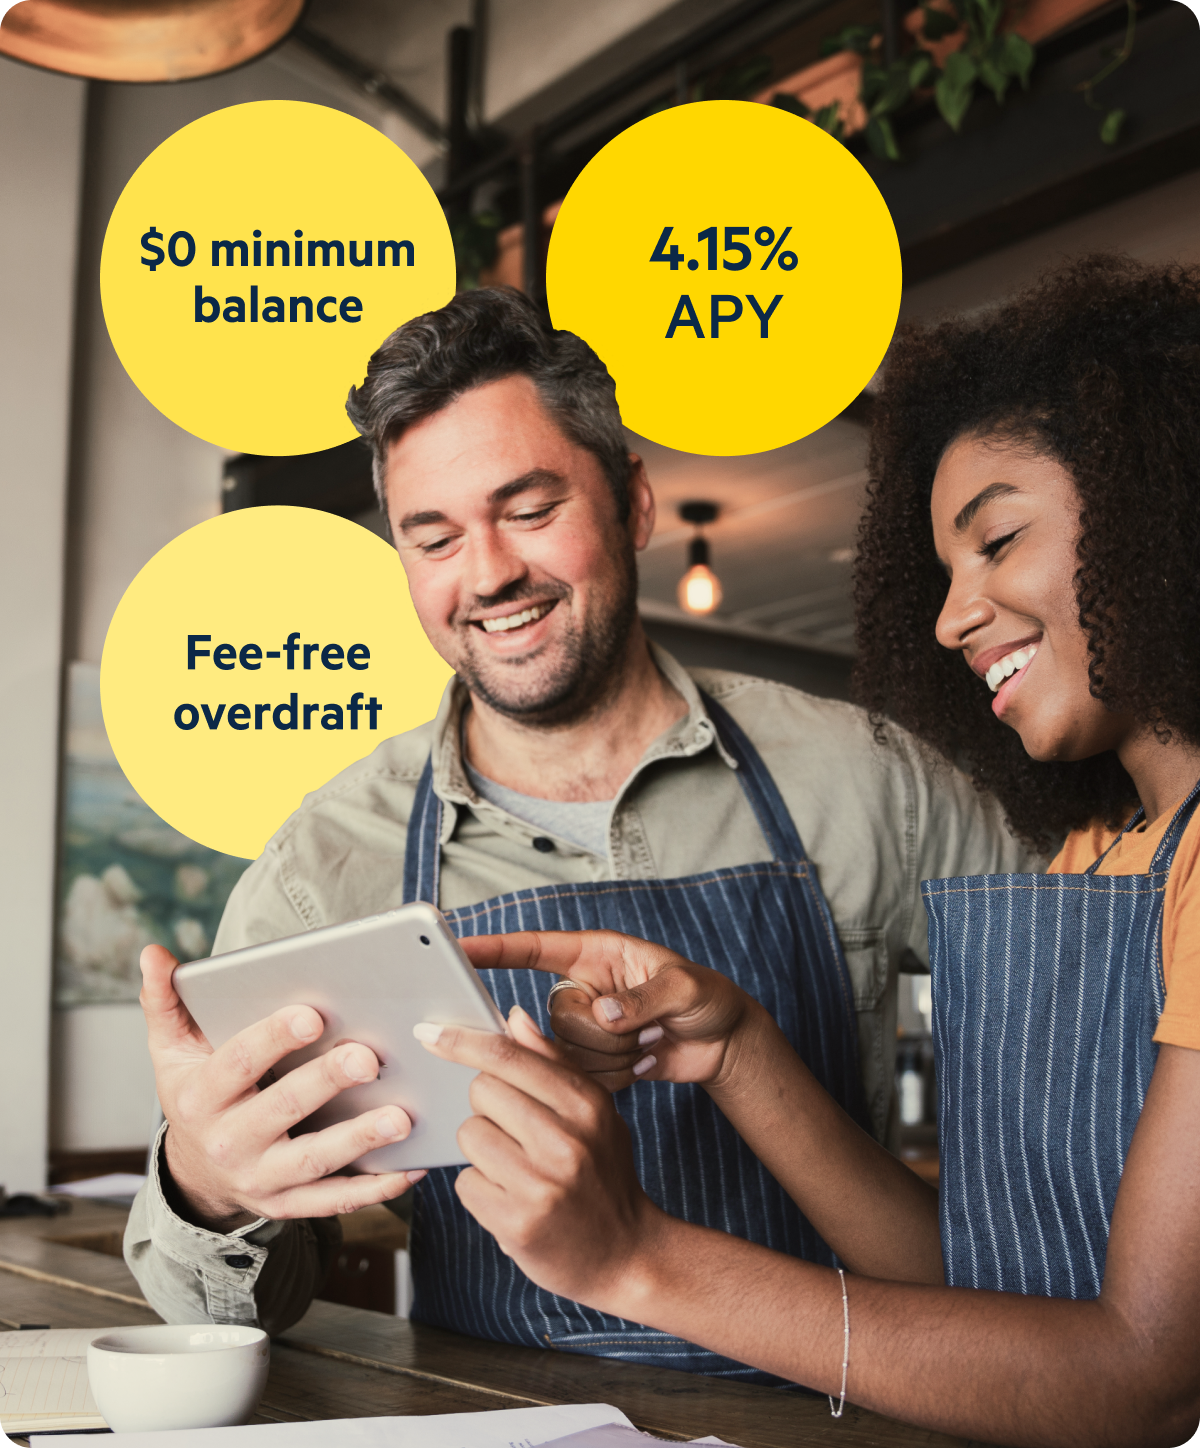 Lili customers shown using the Lili banking platform, with highlighted features displayed in the background ($0 minimum balance, fee-free overdraft, and 2.0% APY)